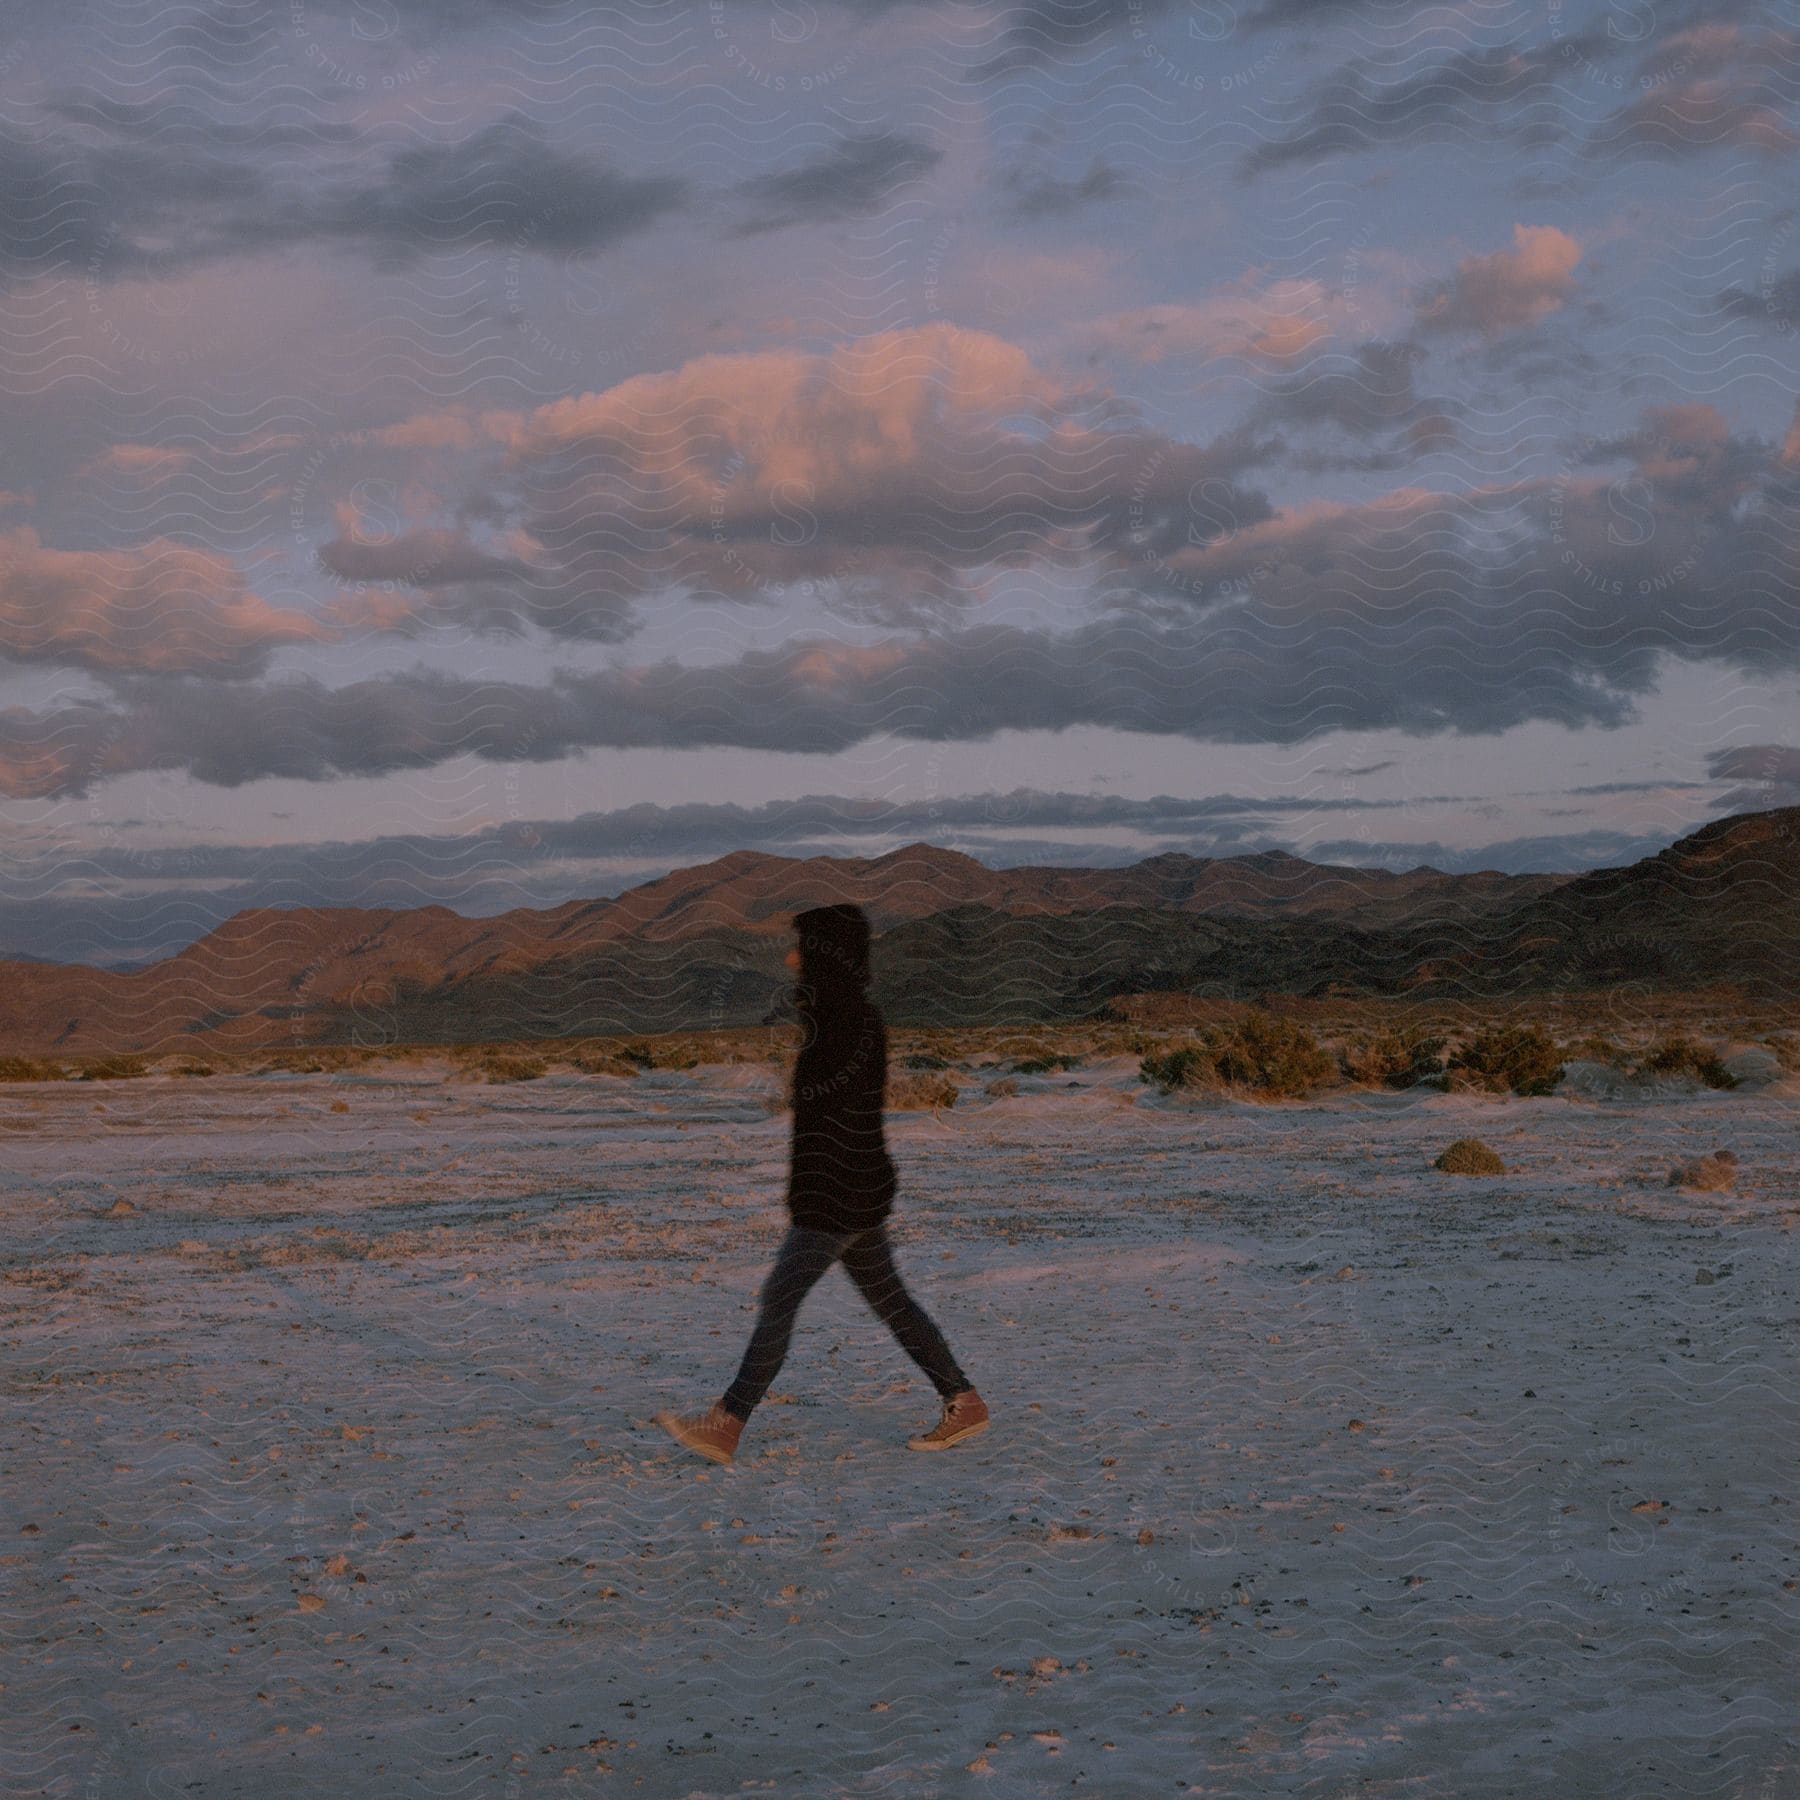 A young woman walks through a sandy desert with hills in the distance